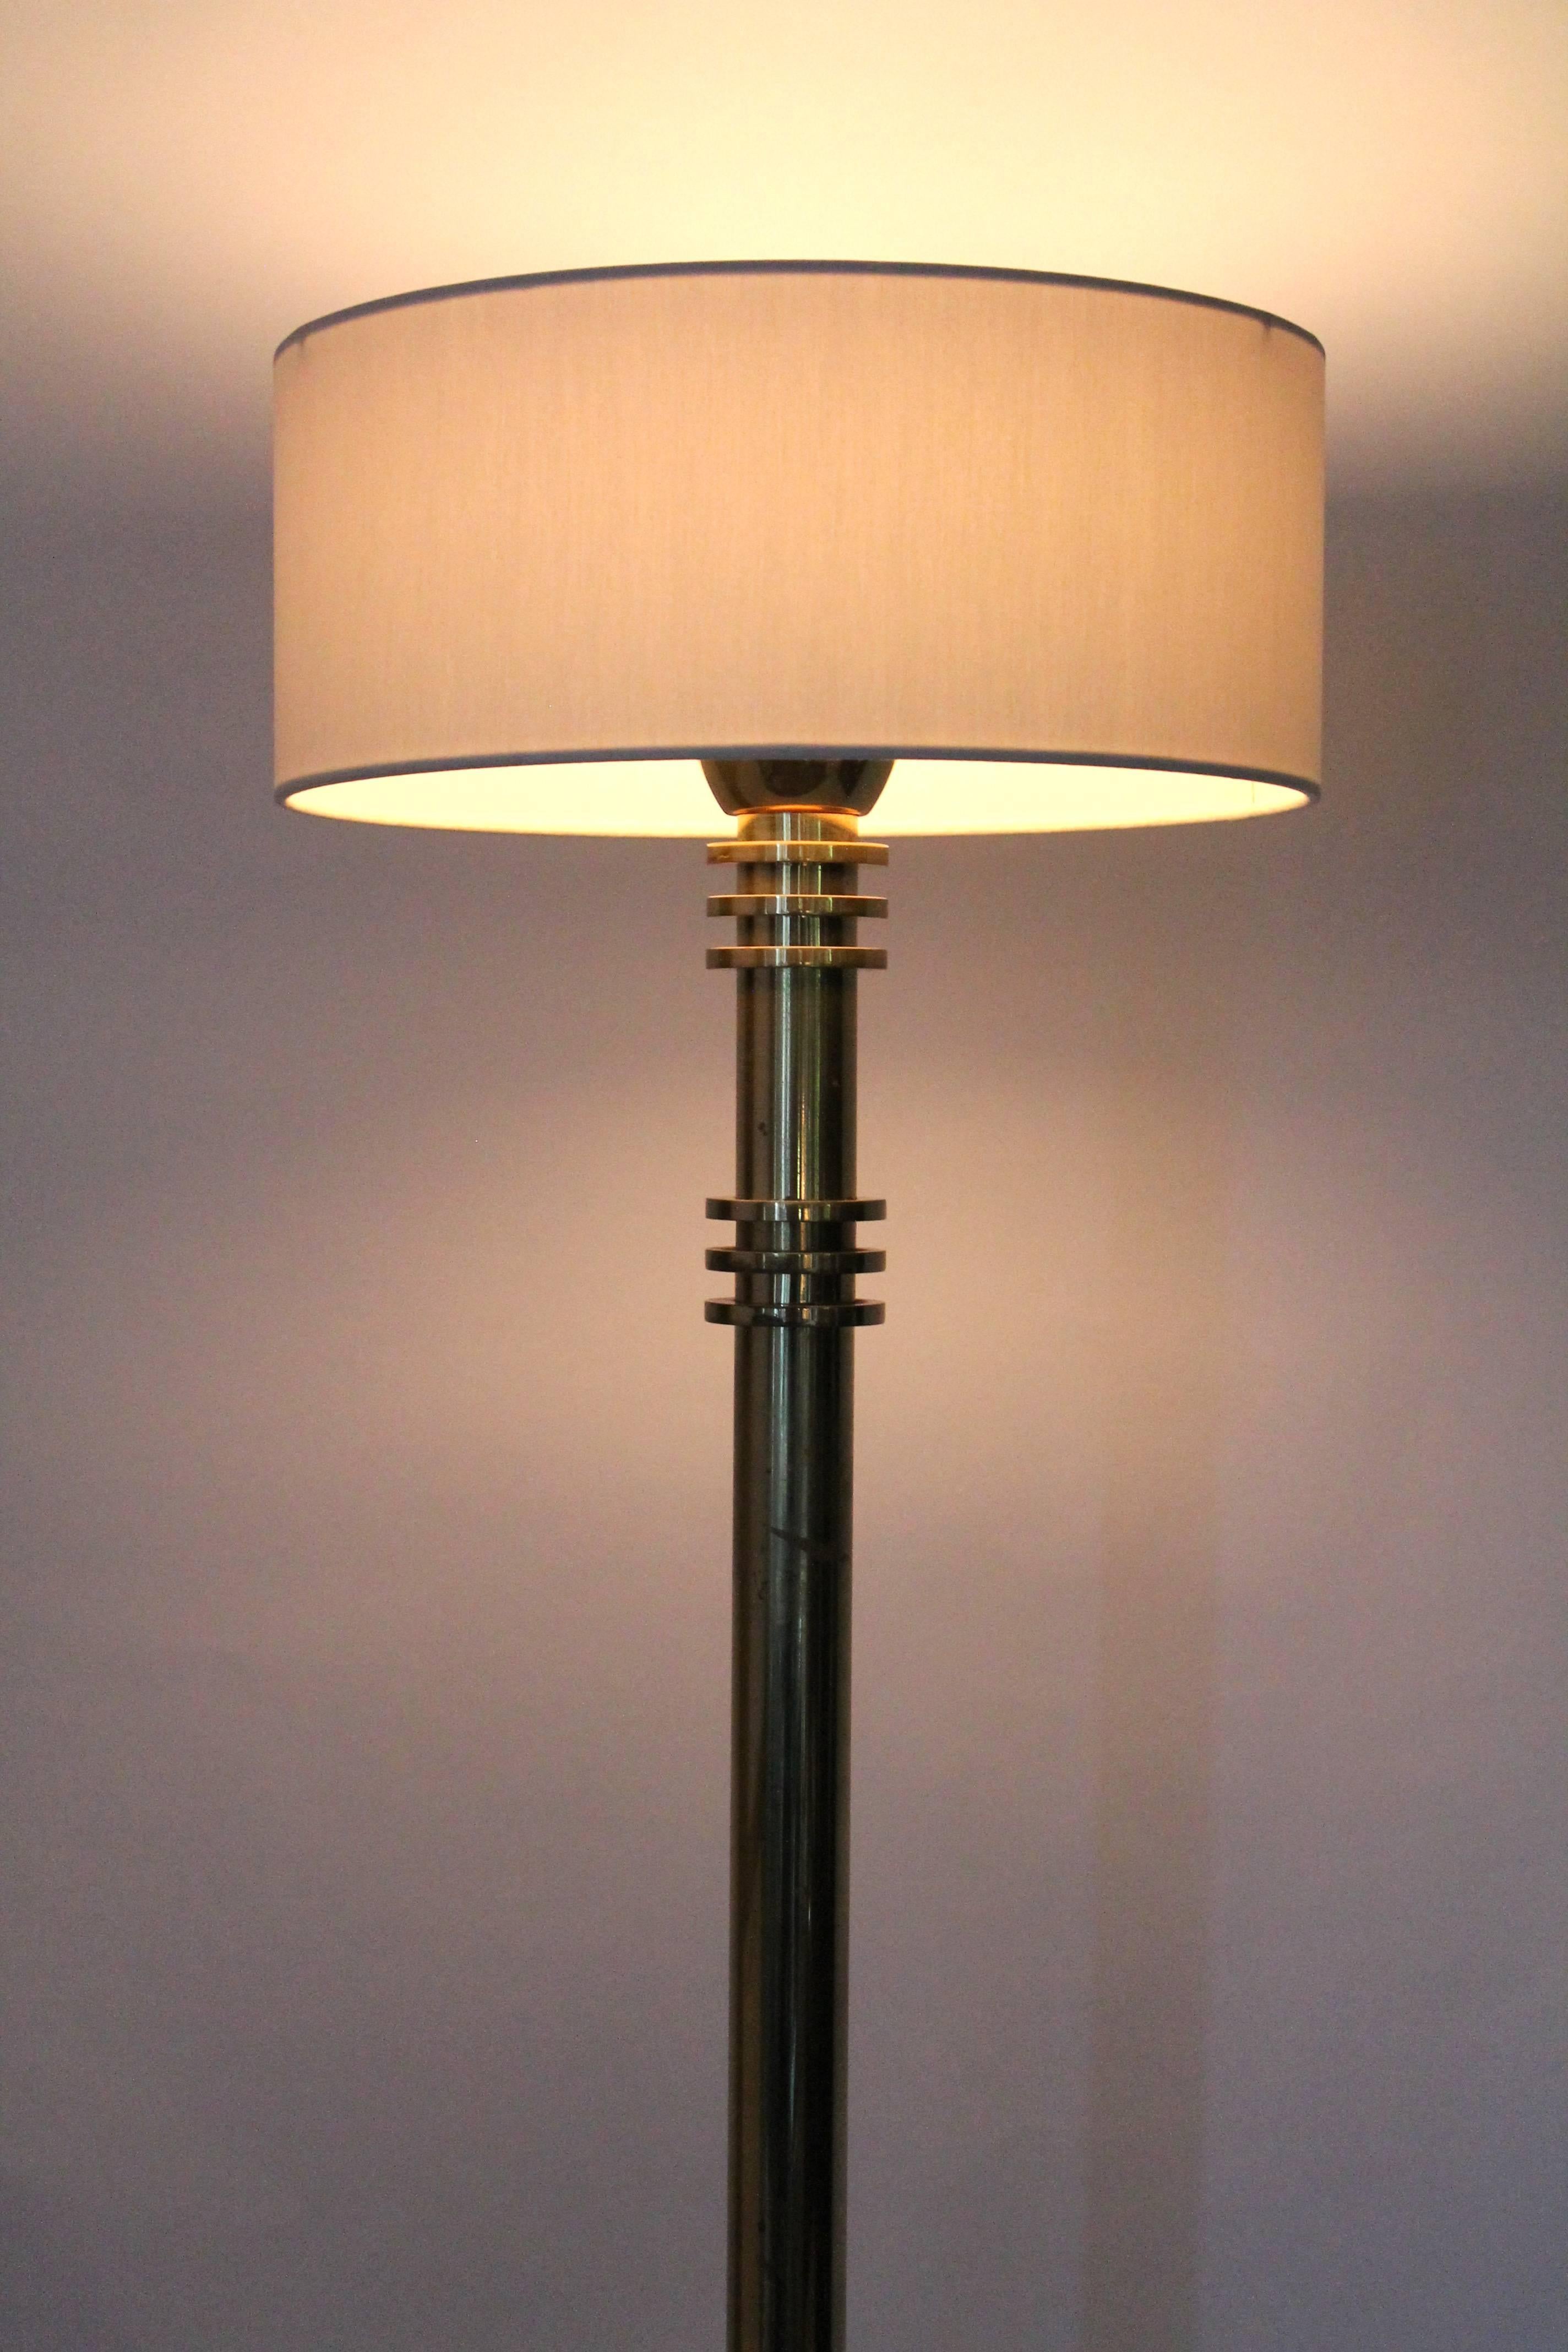 Mid-20th Century Art Deco Style Brass Floor Lamp in the Manners of Karl Springer, 1950s, USA